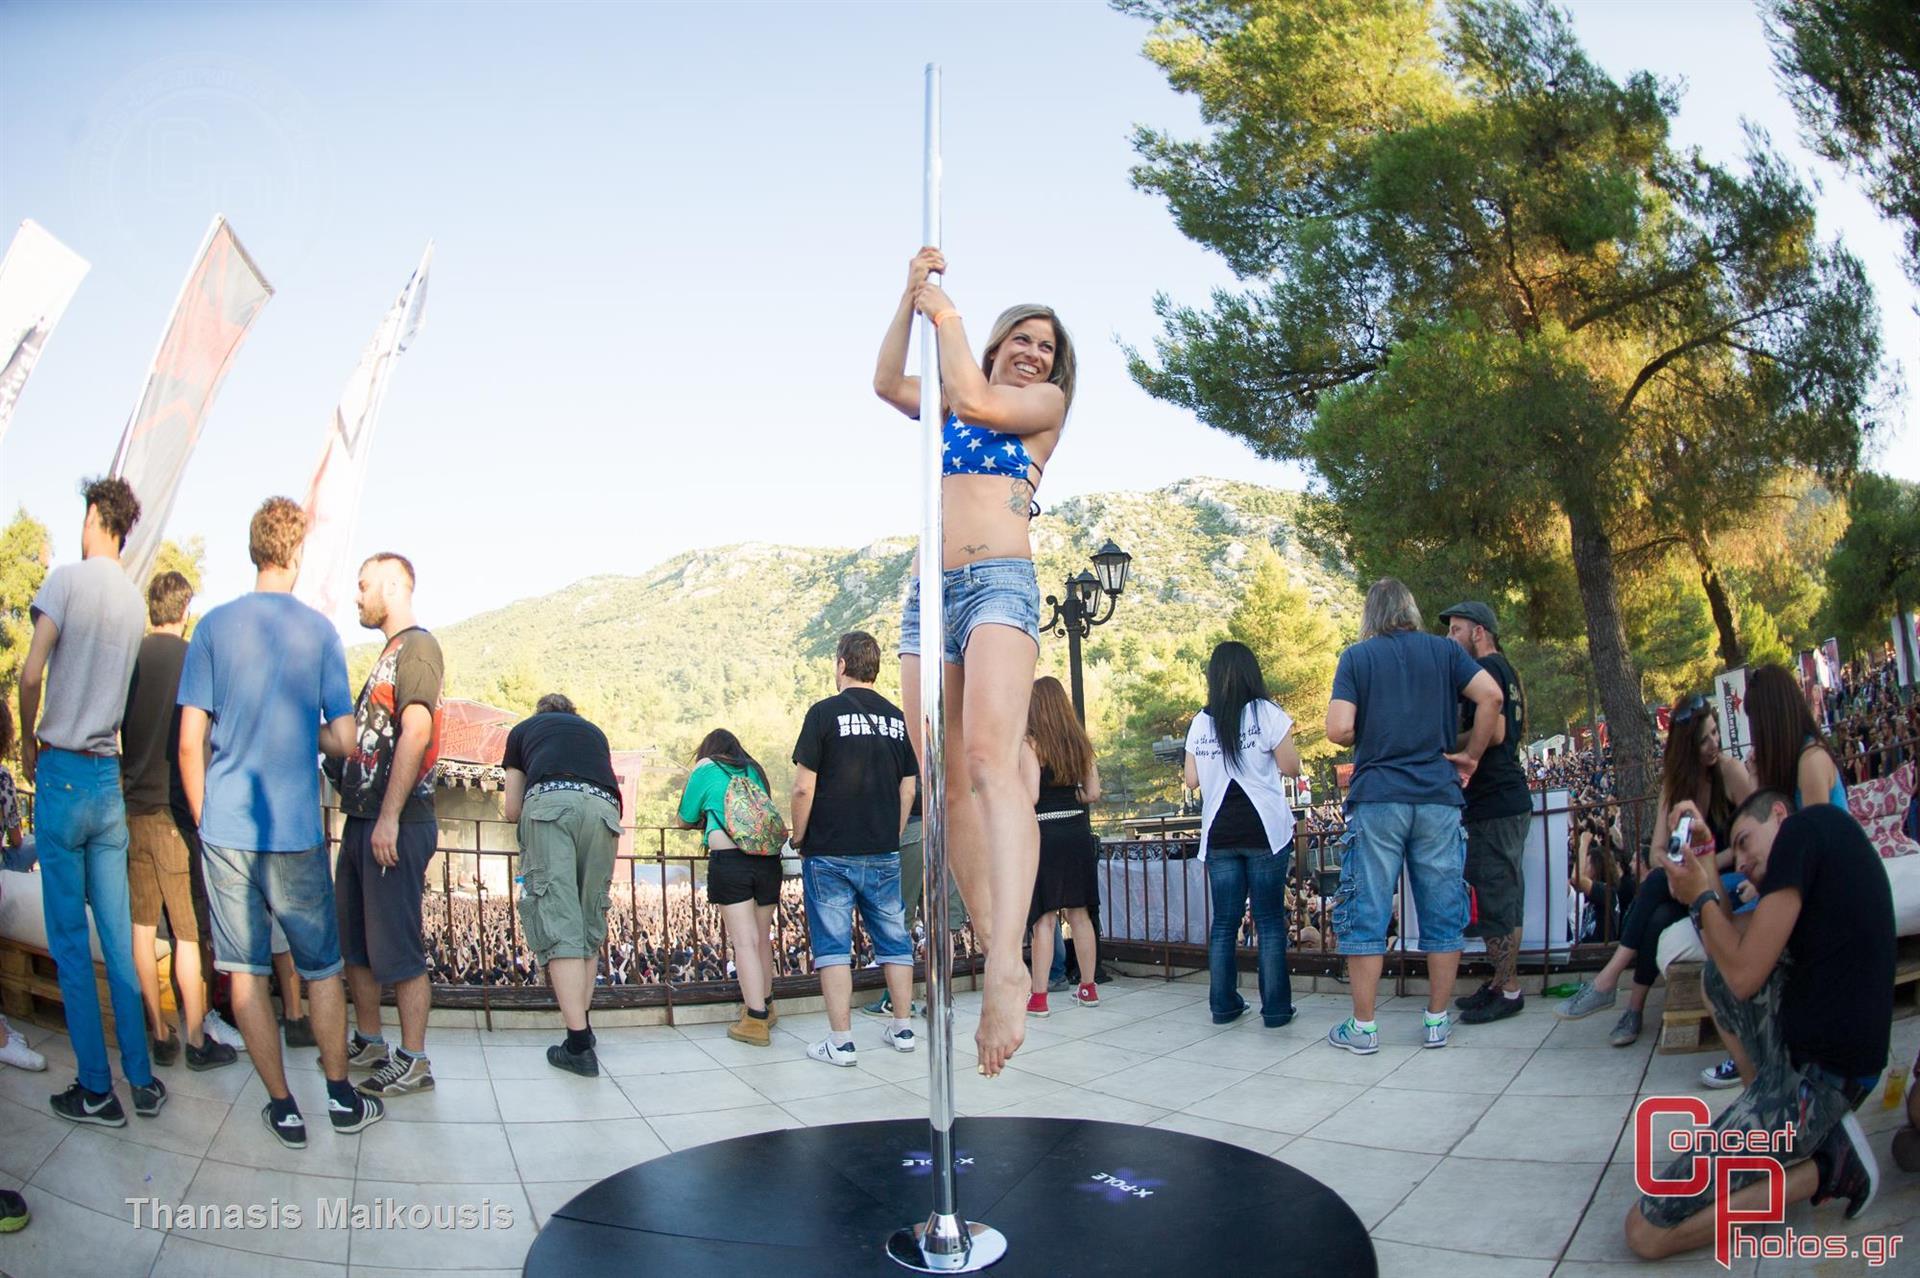 Rockwave 2015 - Day 3-Rockwave 2015 - Day 3 photographer: Thanasis Maikousis - ConcertPhotos - 20150704_1828_58